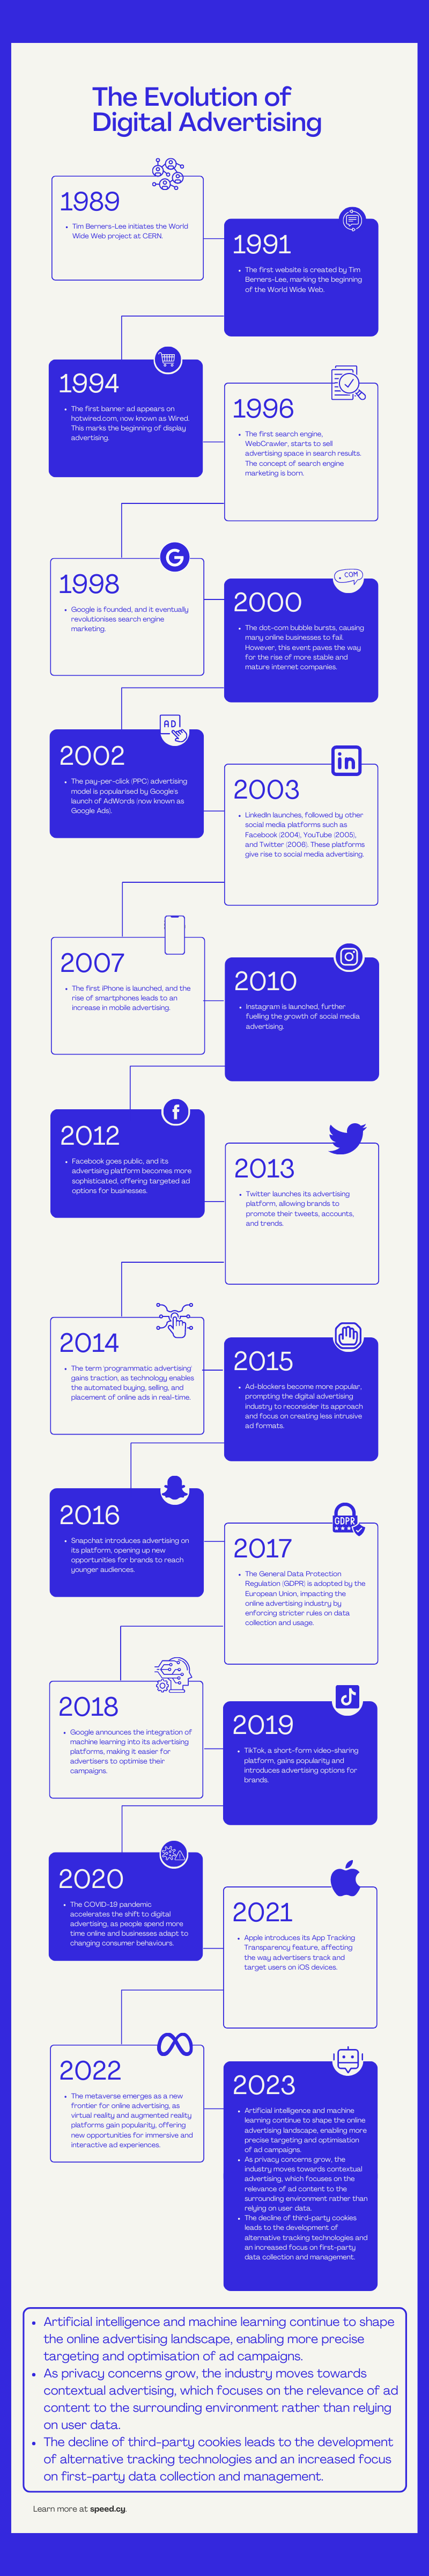 Infografic about the history of online marketing from 1989 to 2023